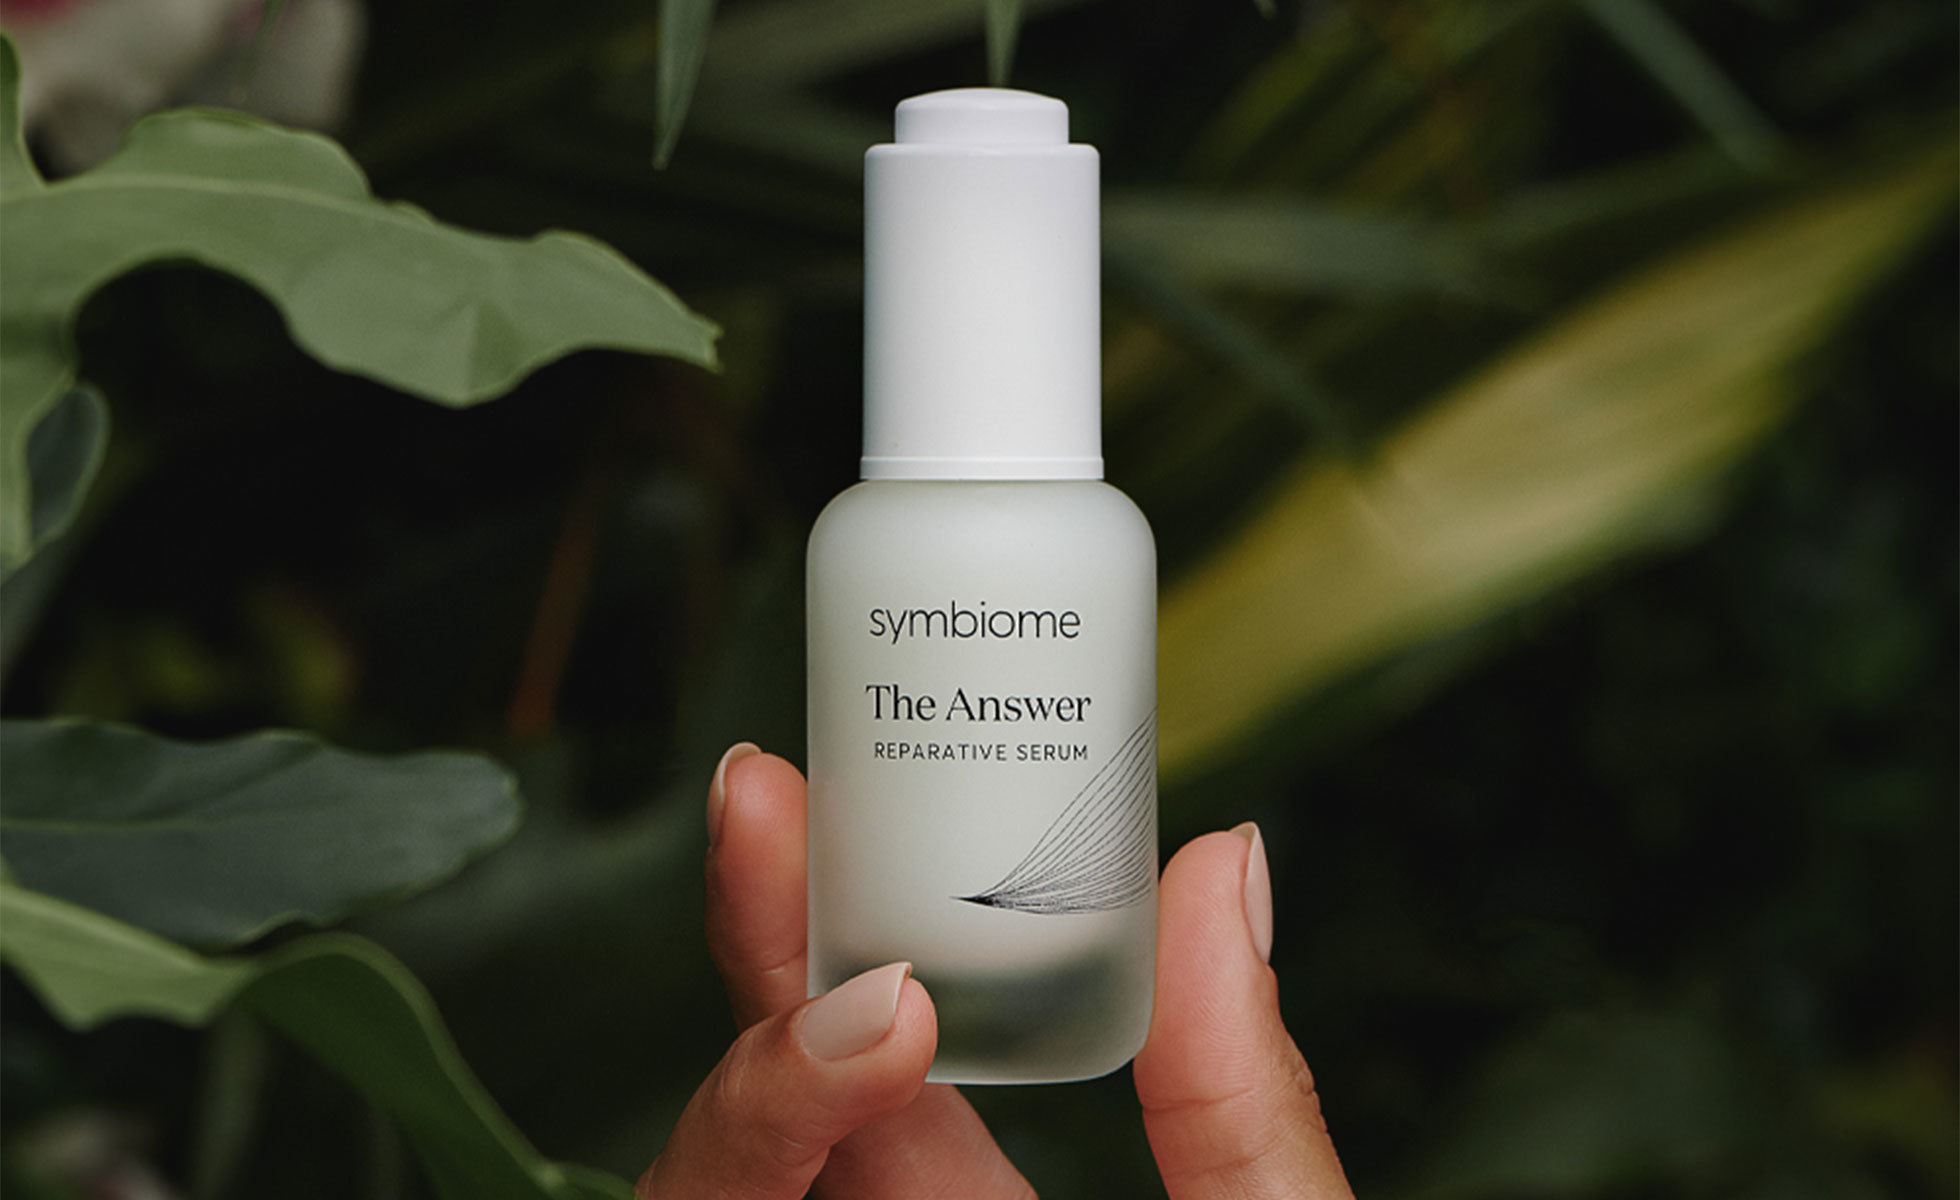 Meet Symbiome, the skincare brand that supports your microbiome.